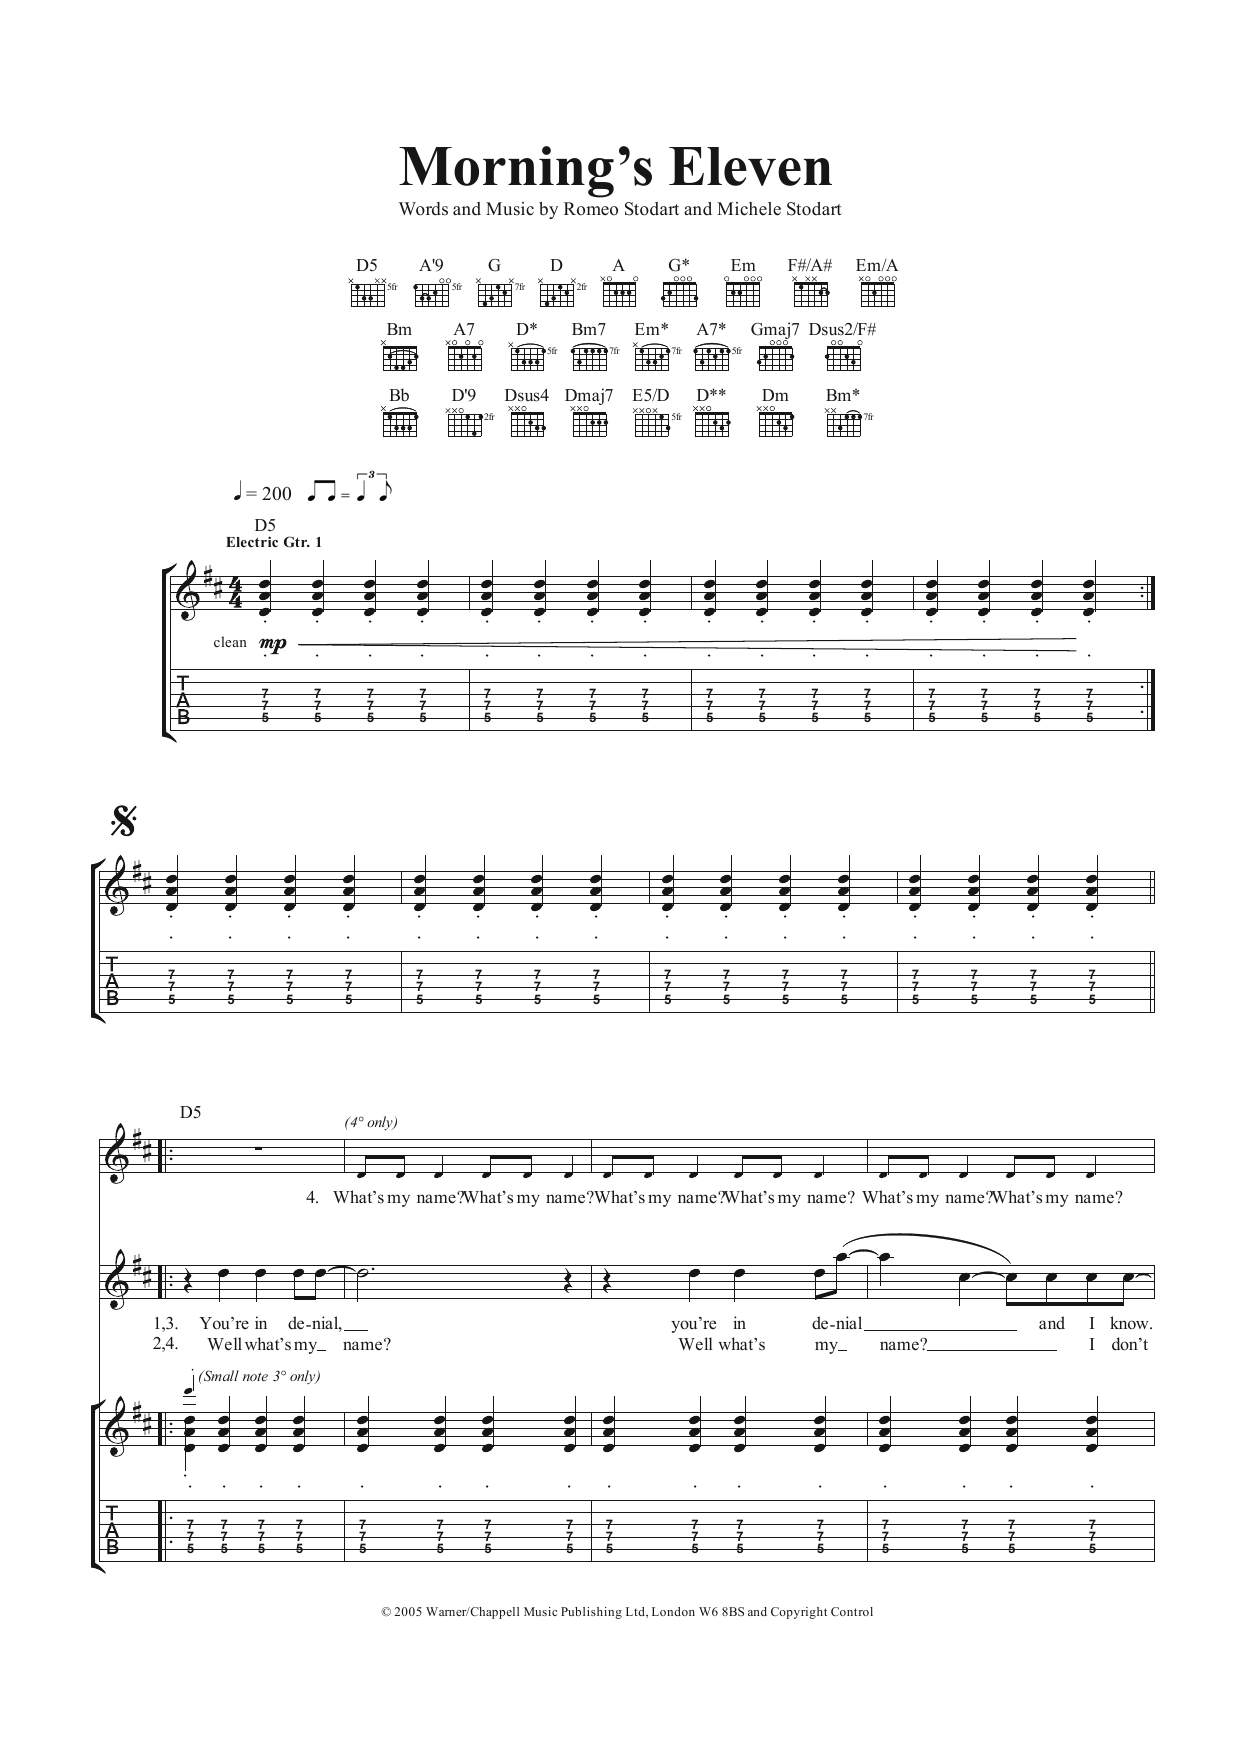 Download The Magic Numbers Mornings Eleven Sheet Music